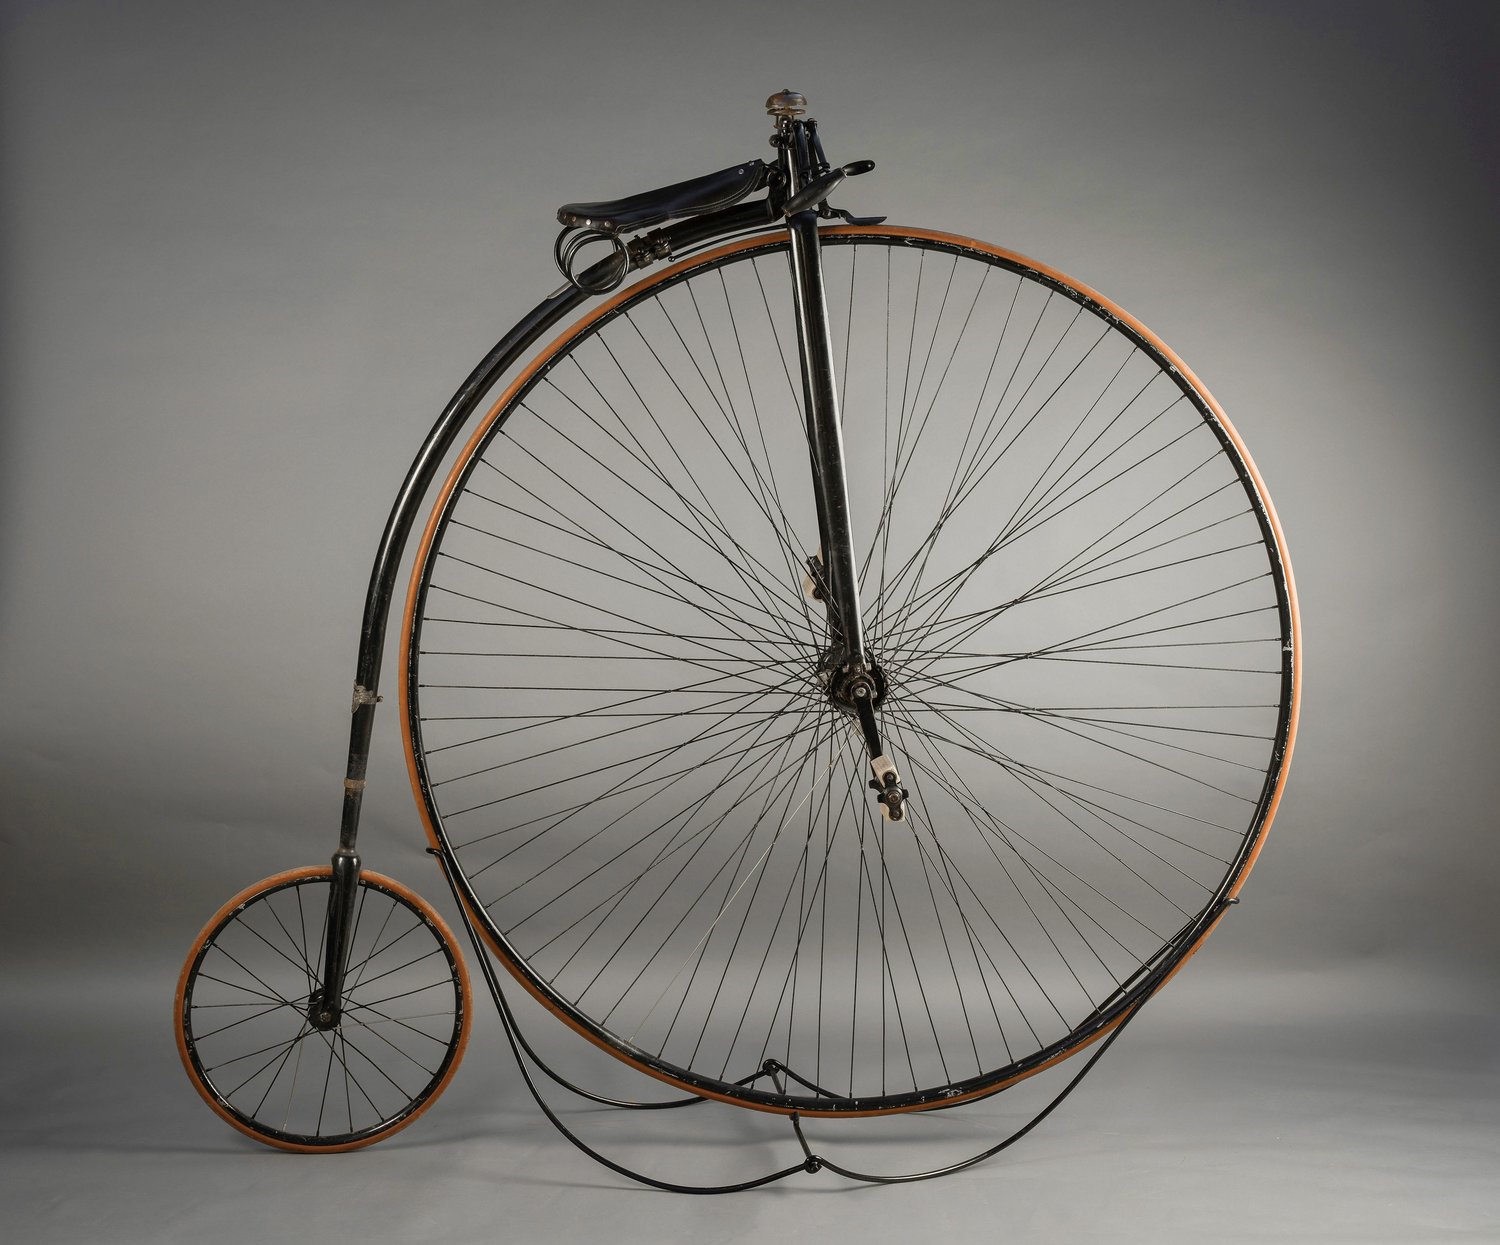 50-inch Victor Light Roadster, 1889, Collection of Keith Pariani